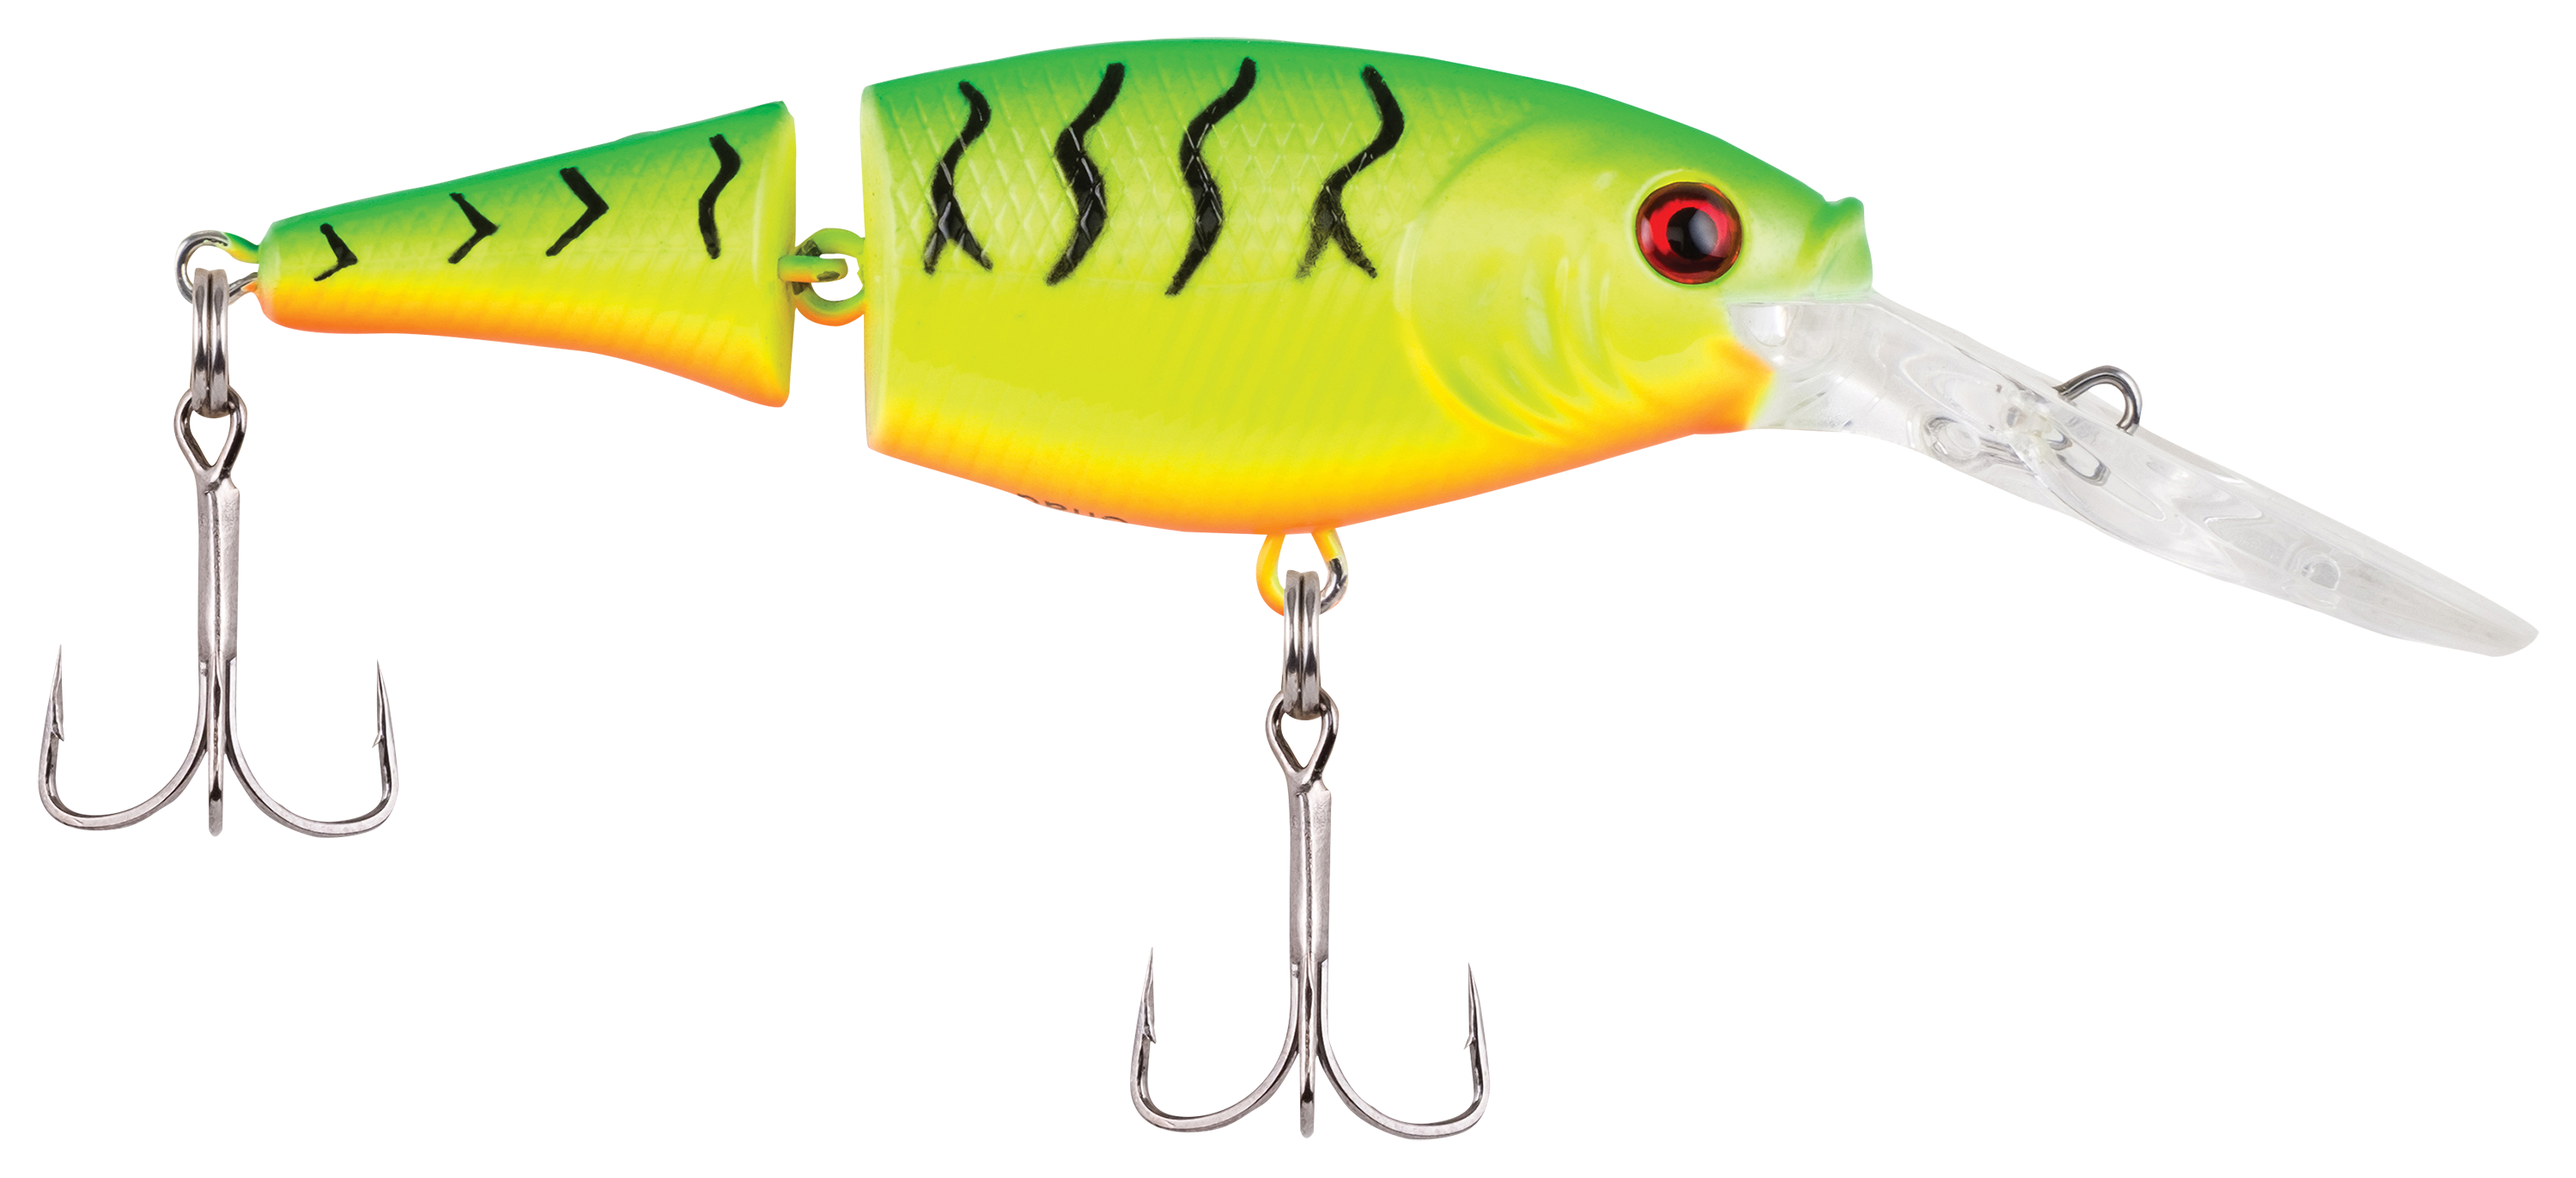  Berkley Flicker Shad Jointed Fishing Lure, Chartreuse Pearl,  1/3 Oz, 2 3/4in 7cm Crankbaits, Size, Profile And Dive Depth Imitates Real  Shad, Equipped